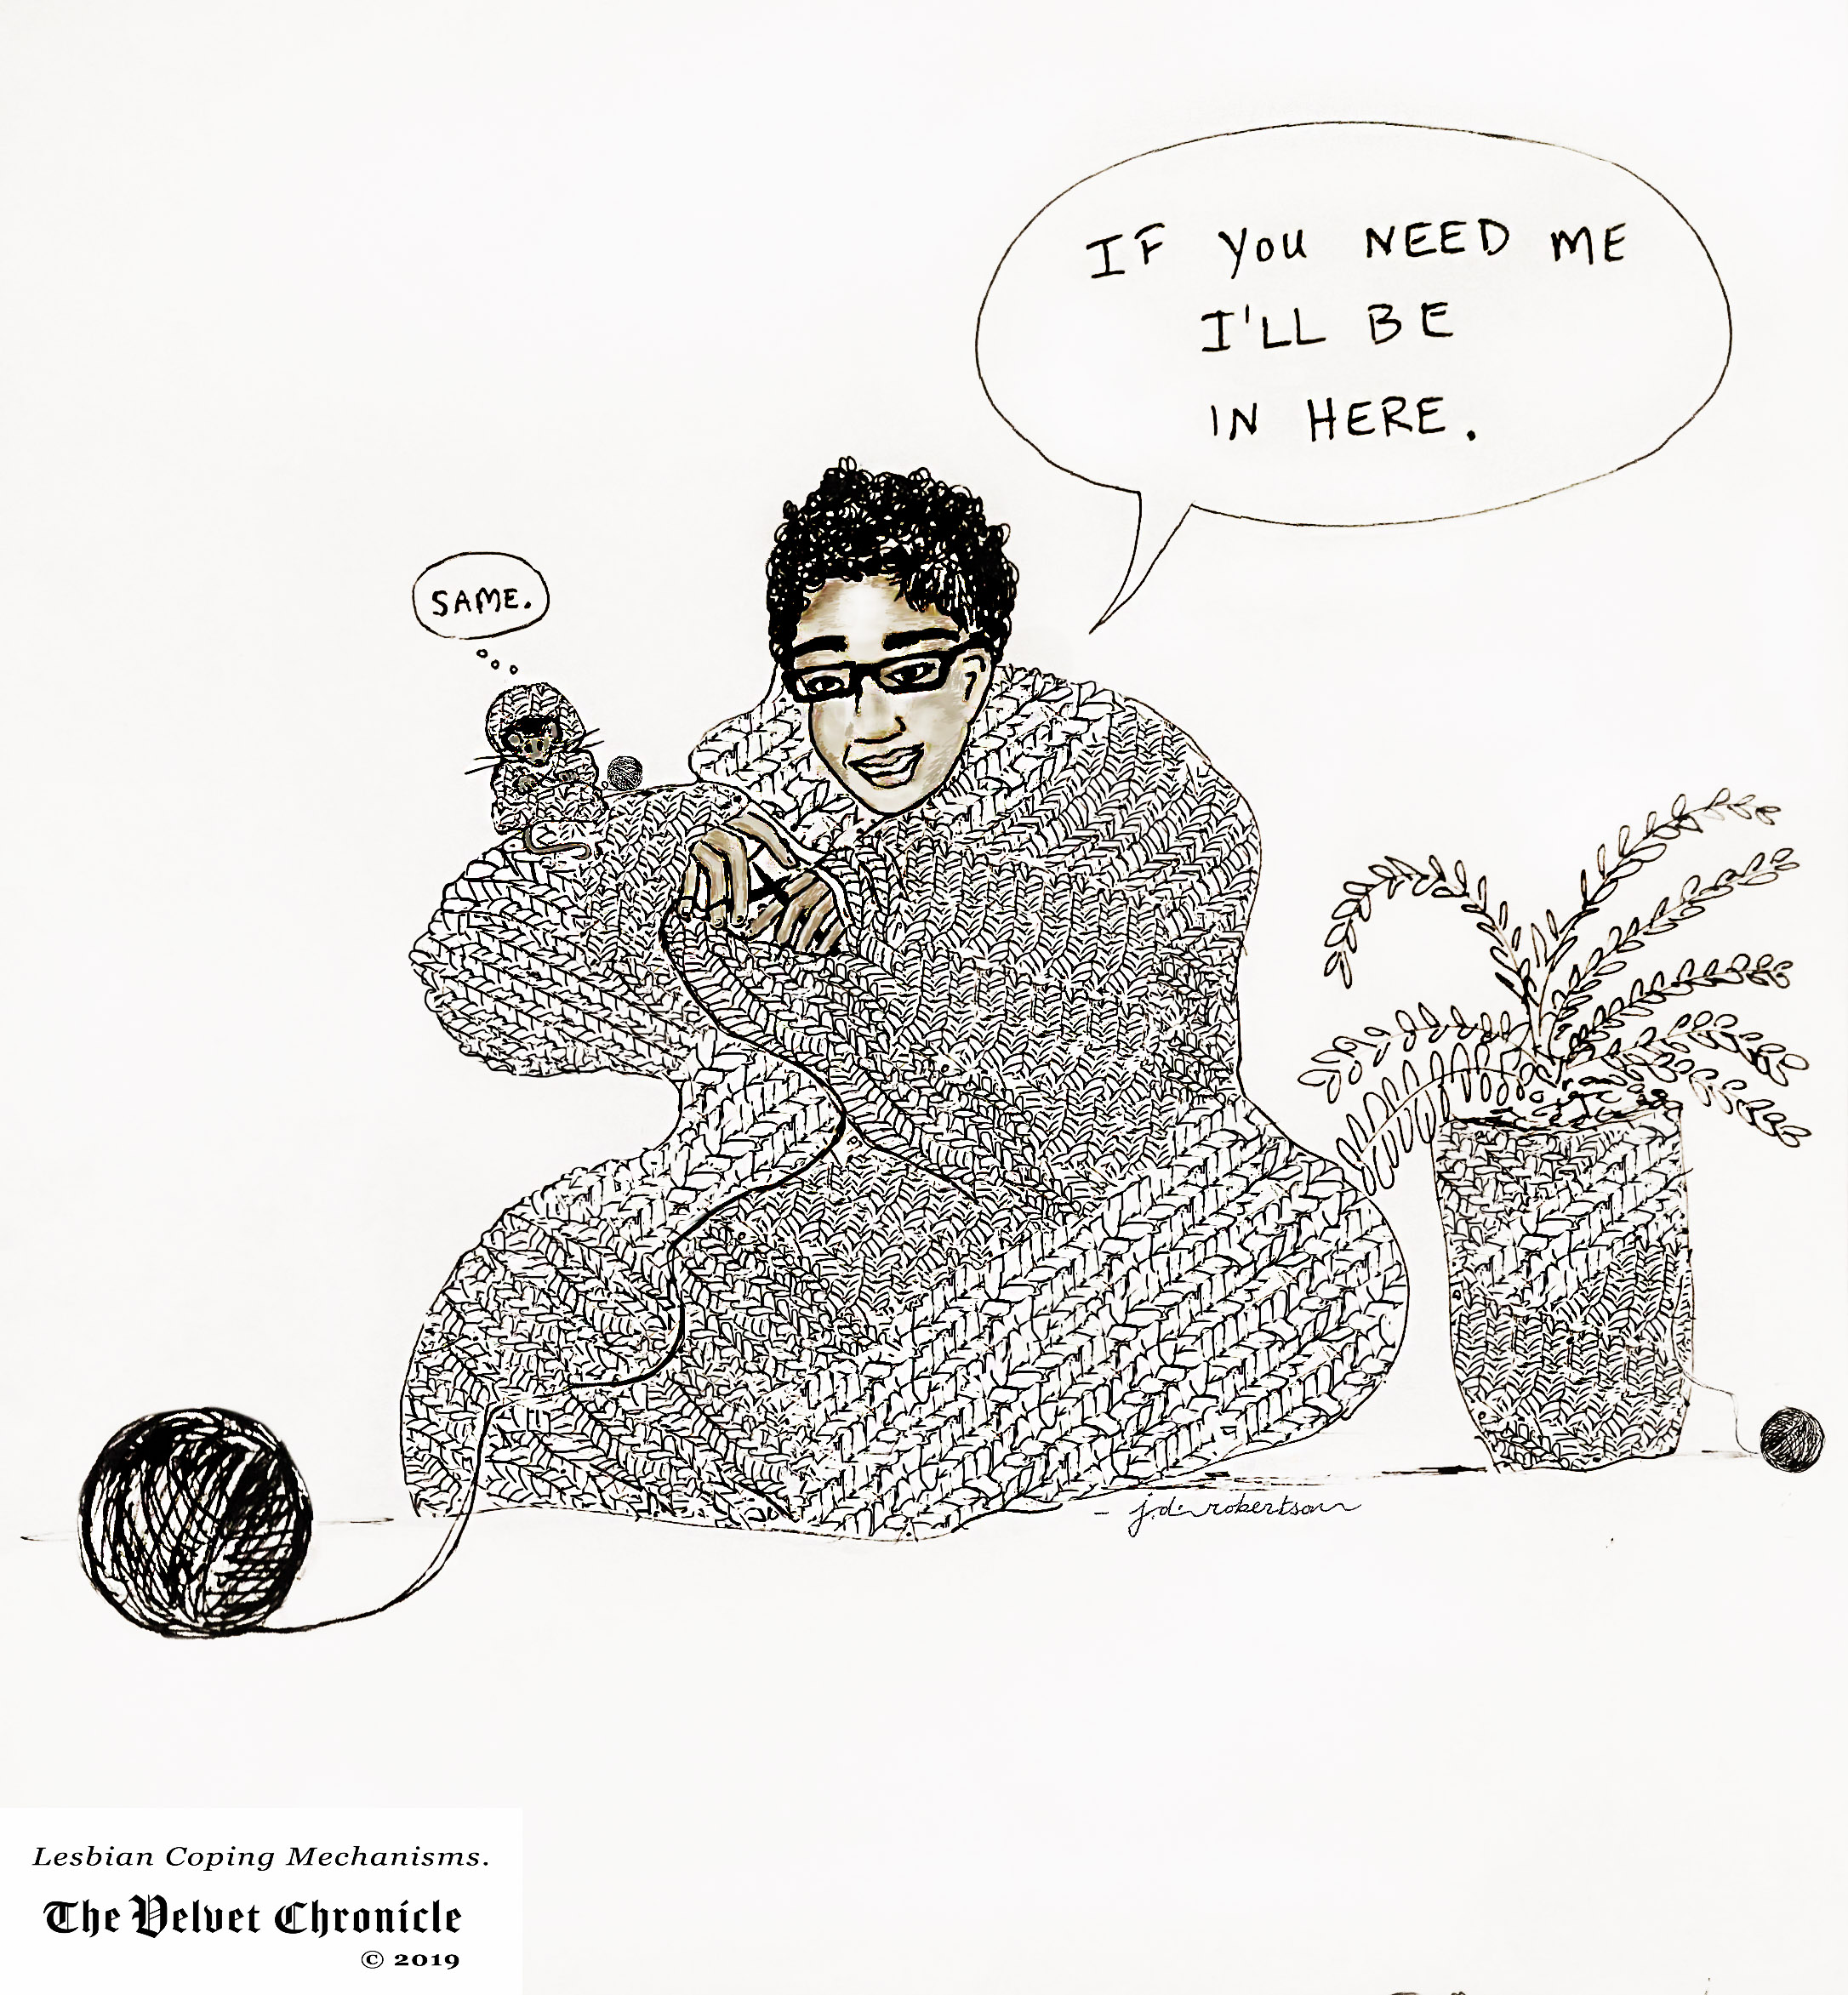 Claire shrugged and kept knitting, cartoon